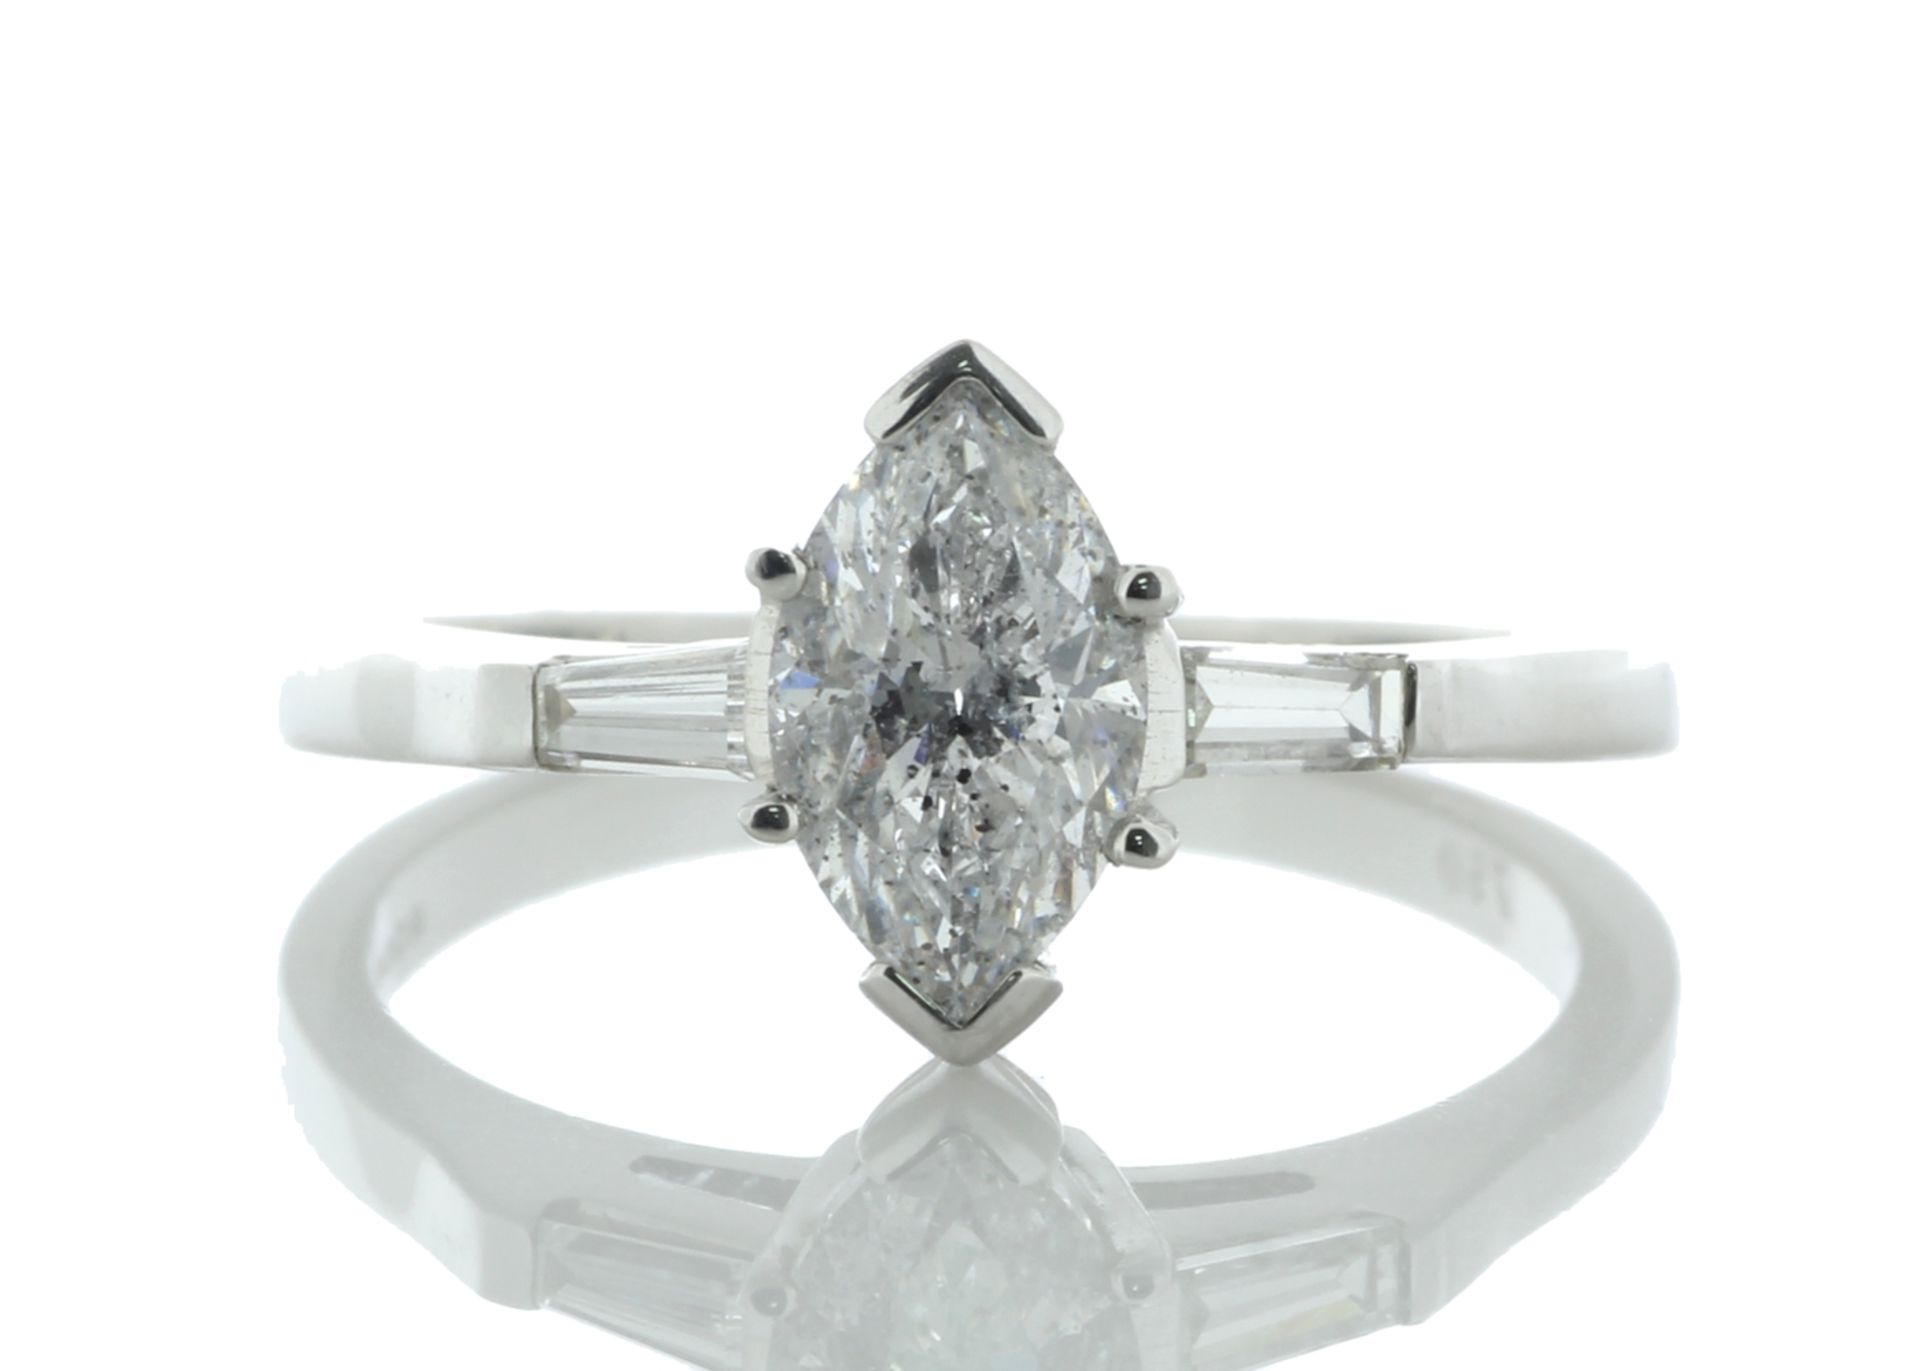 18ct White Gold Single Stone Marquise Cut Diamond Ring (1.01) 1.22 Carats - Valued by GIE £17,945.00